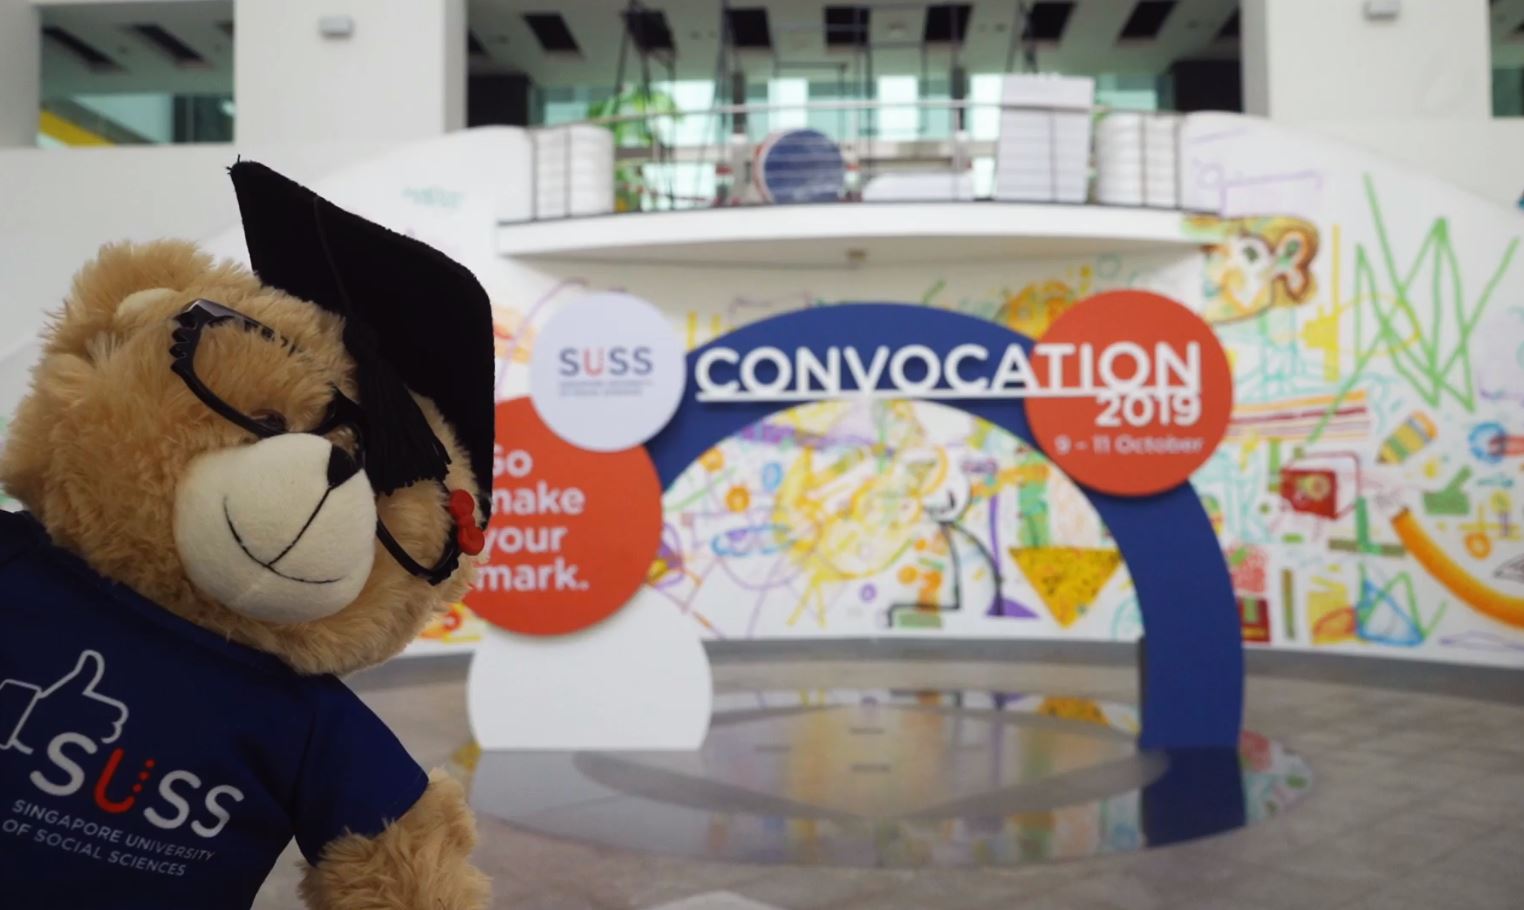 A SUSScessful Road to Convocation 2018/19